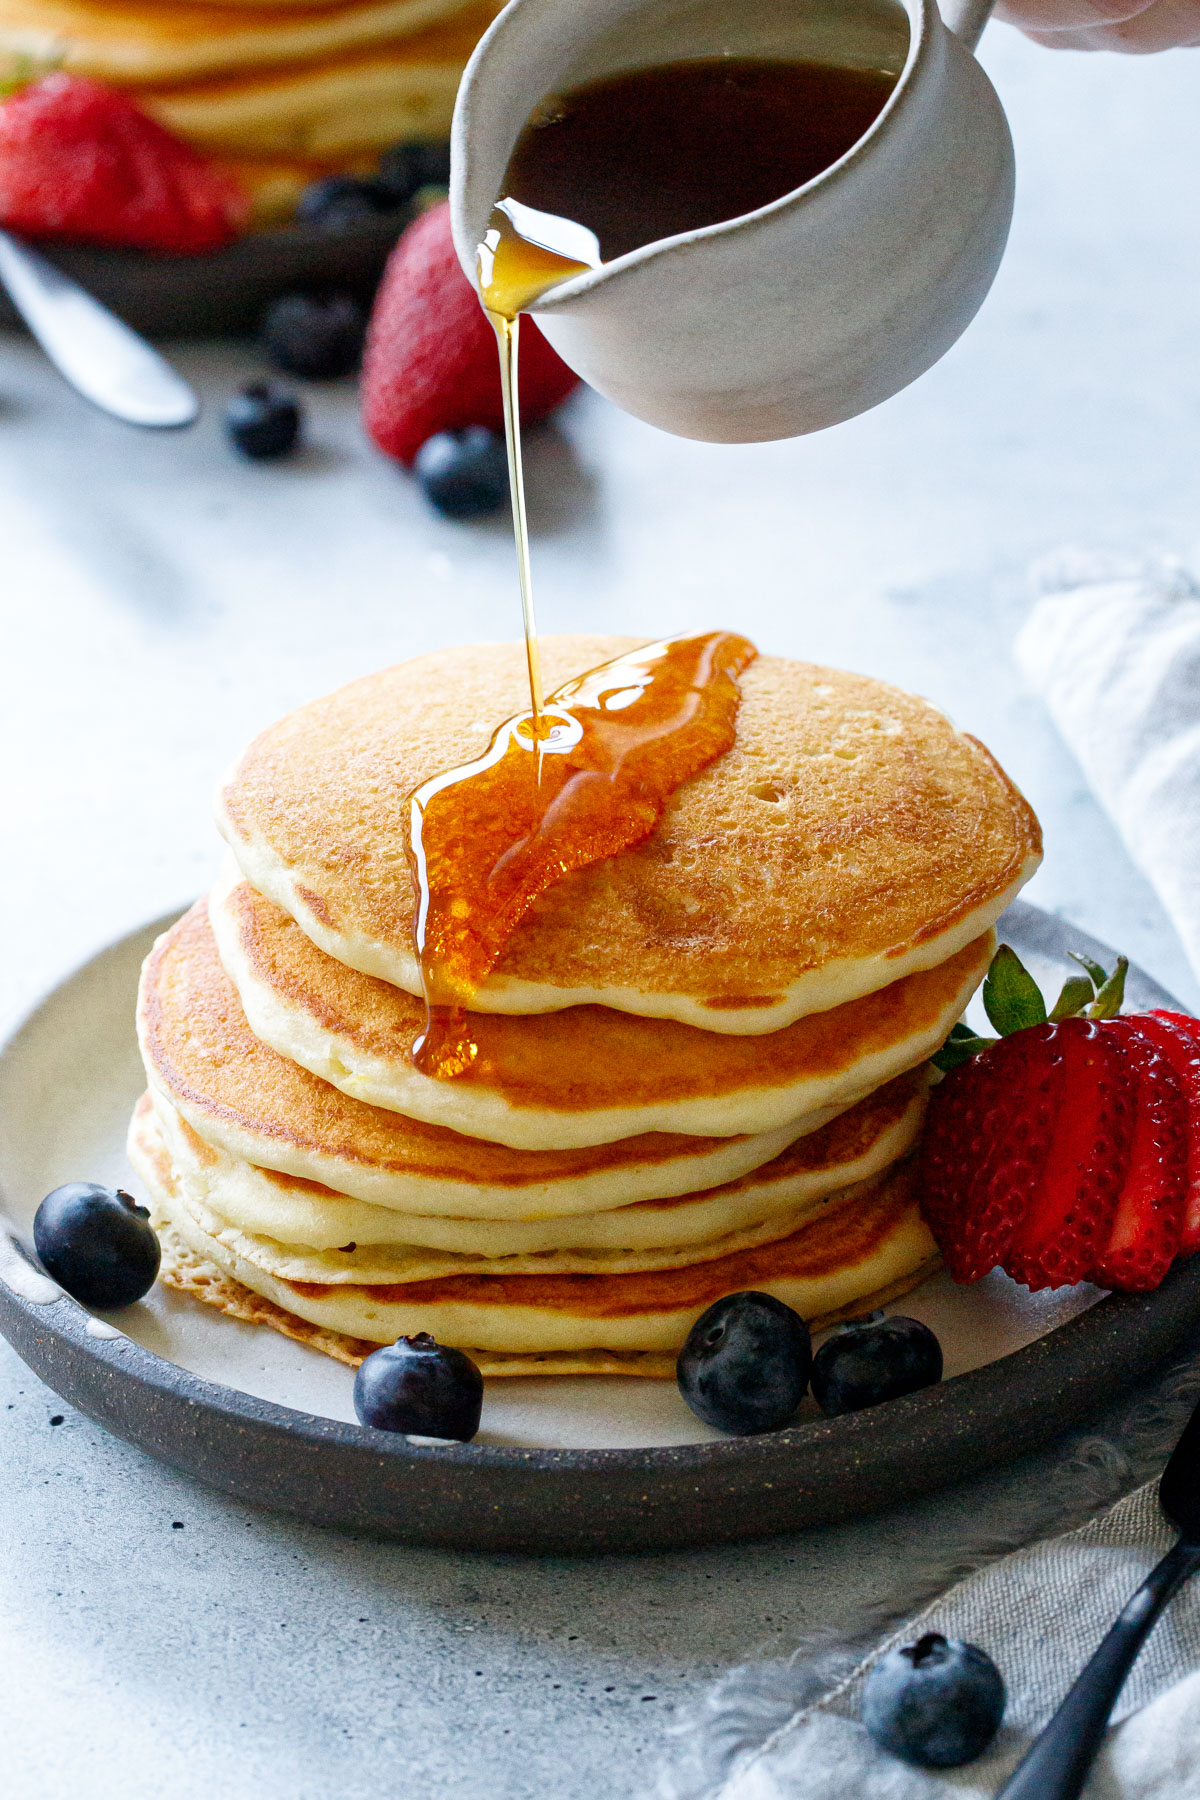 Pouring maple syrup on a stack of Olive Oil Pancakes with a drip down the side, a few blueberries and a sliced strawberry on the side.